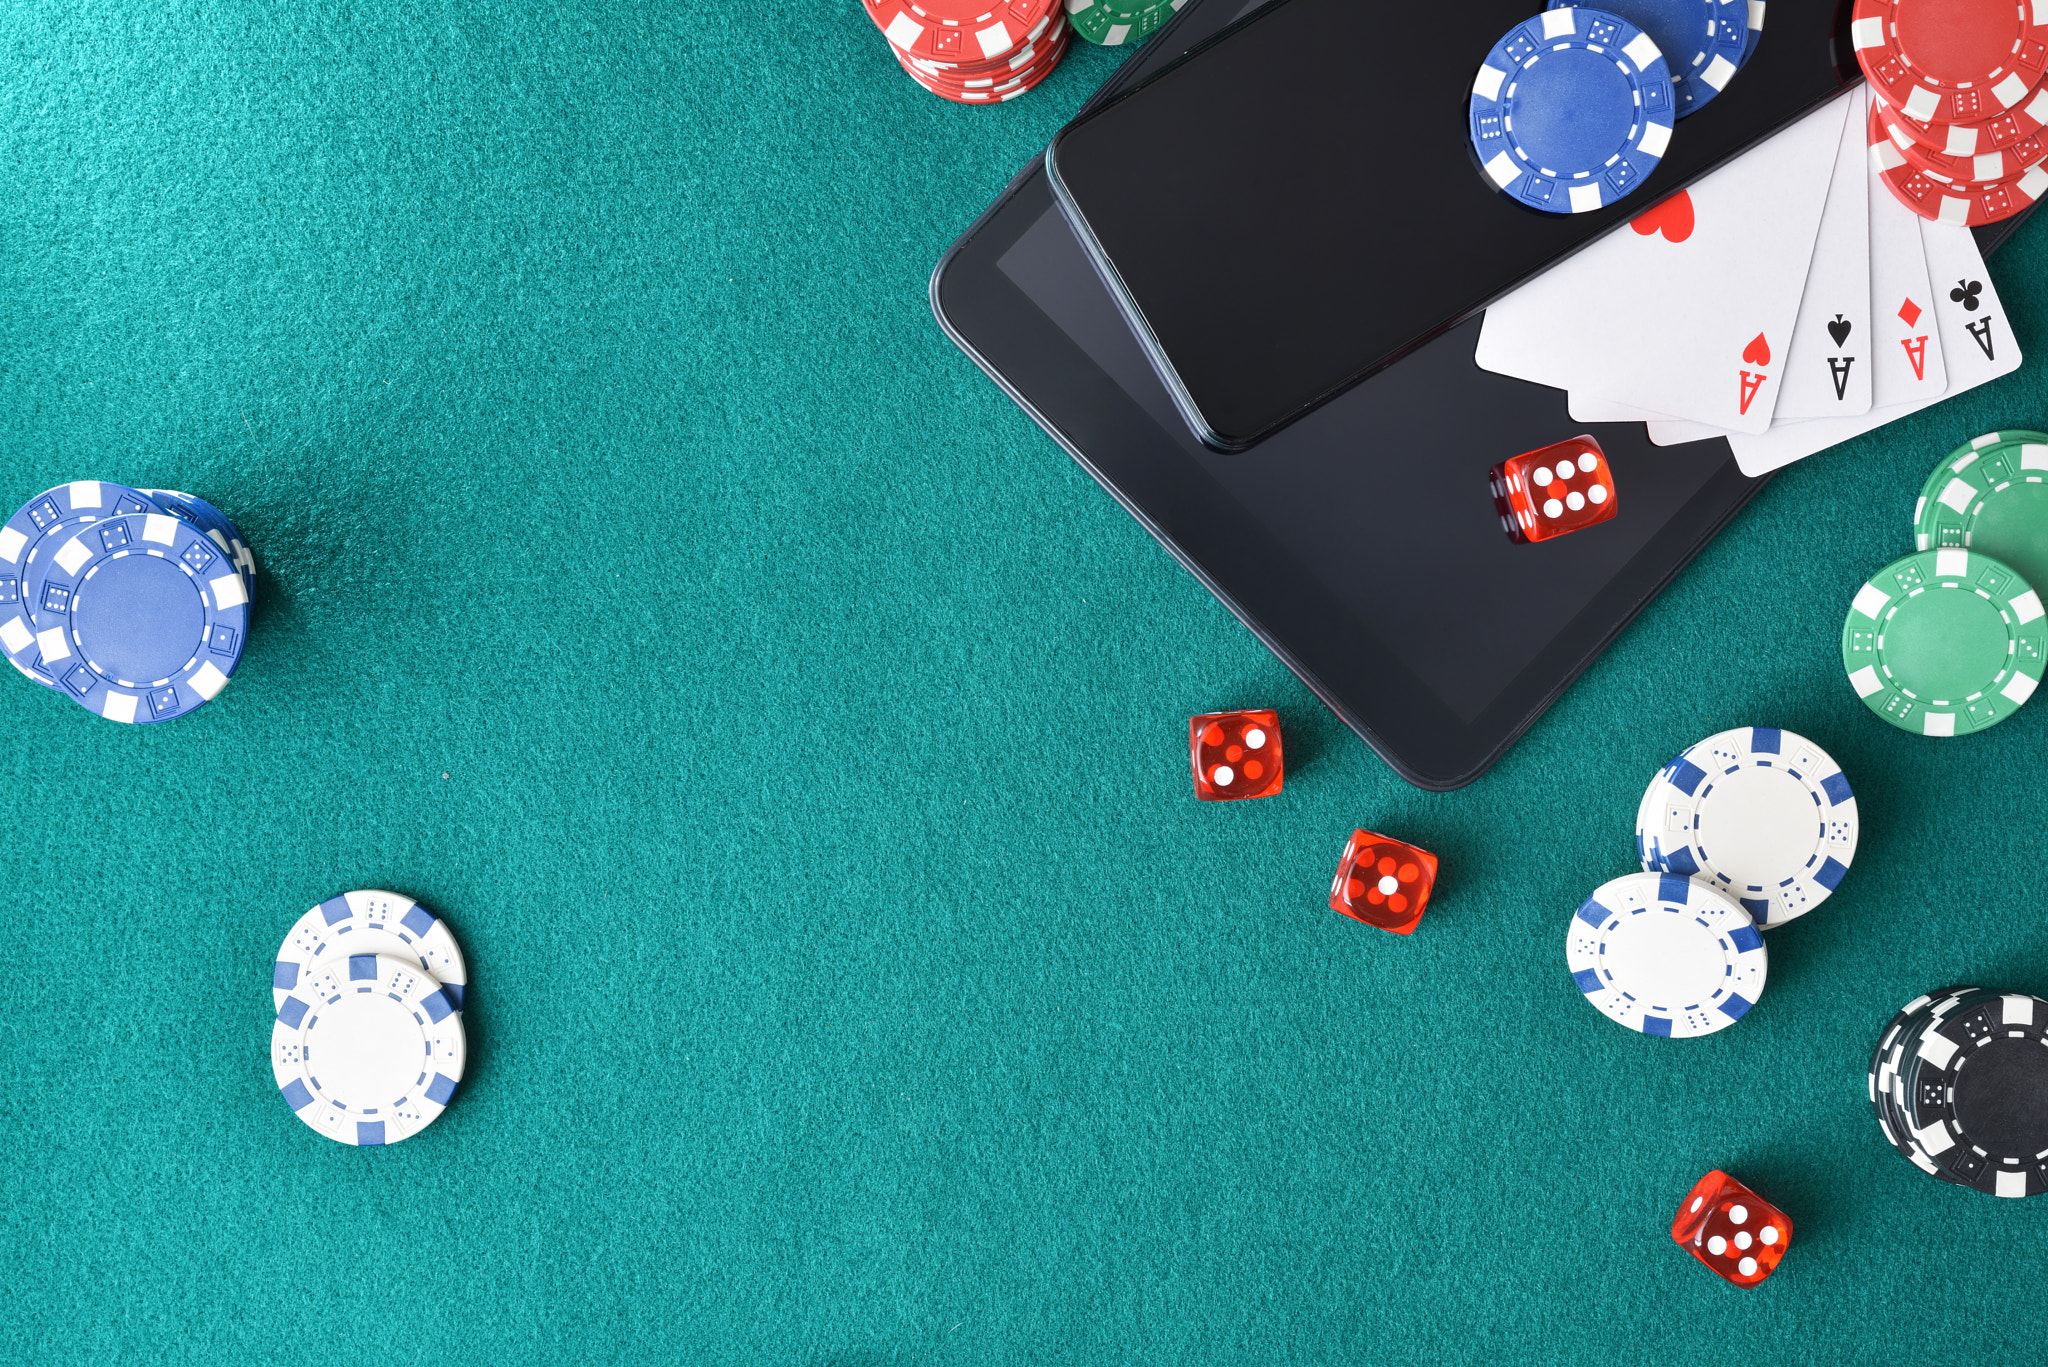 Online casino games with mobile devices on mat with objects